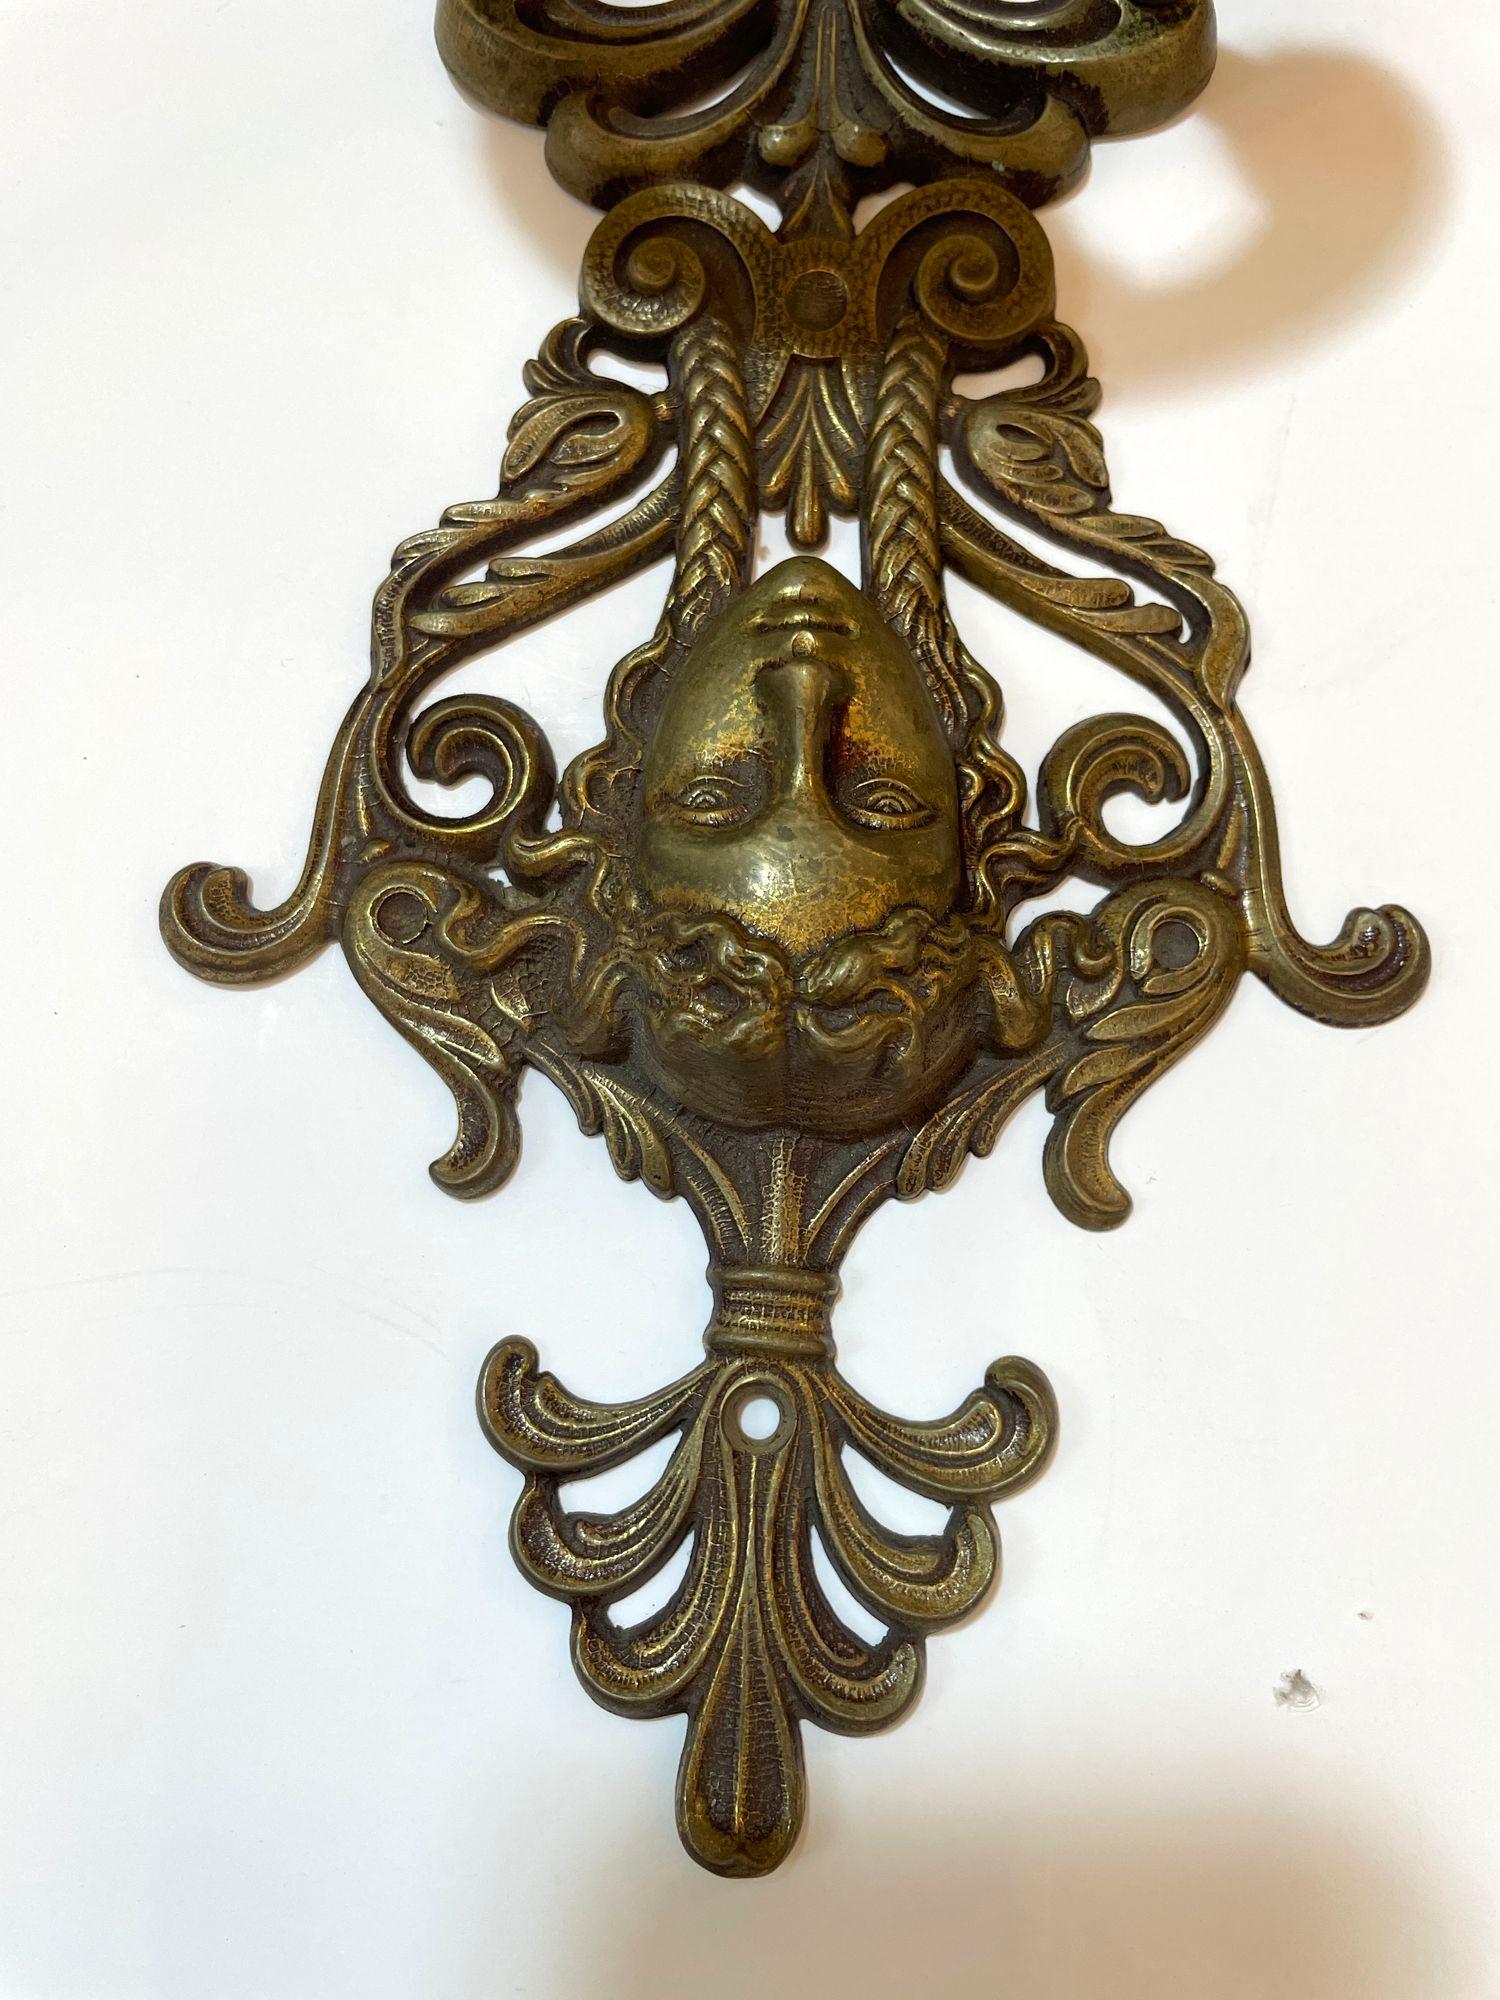 Antique Ornate Italian Figural Architectural Cast Brass Wall Hook Decor Set of 3 For Sale 11